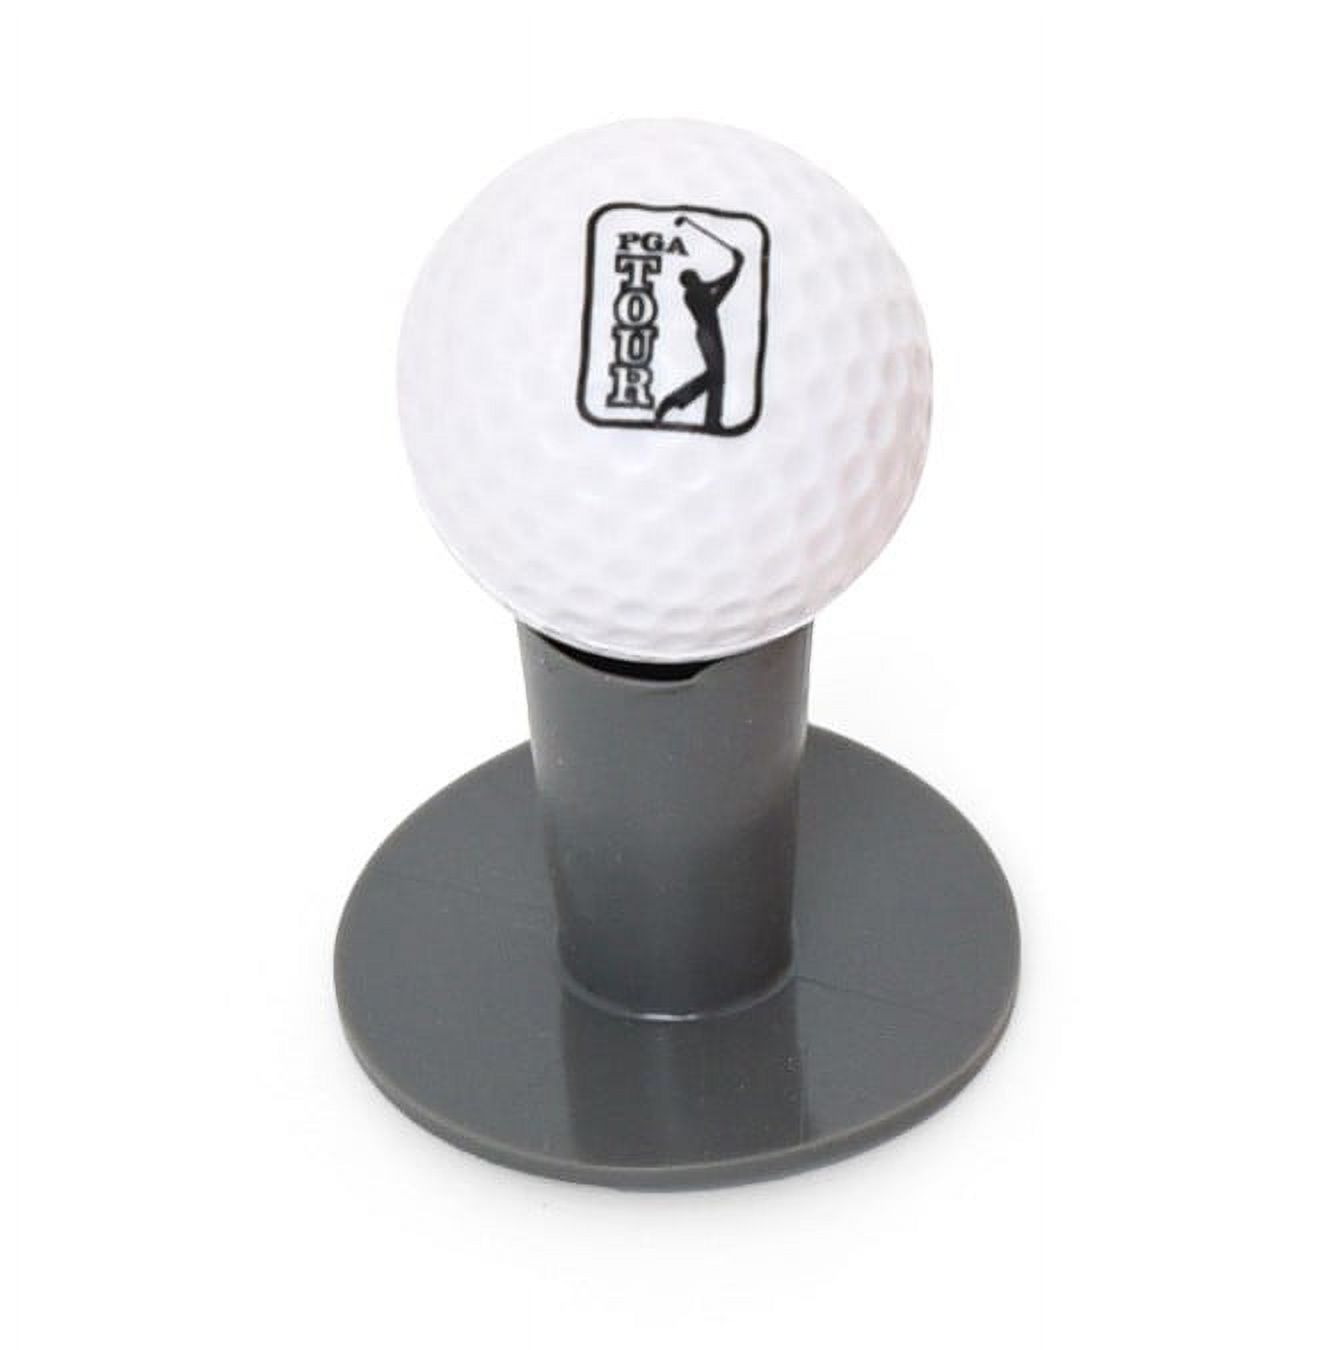 PGA Tour Tee-Up Kids Golf Rubber Tees, 3pack, Black 1.5" Height, 2" Length - image 4 of 11